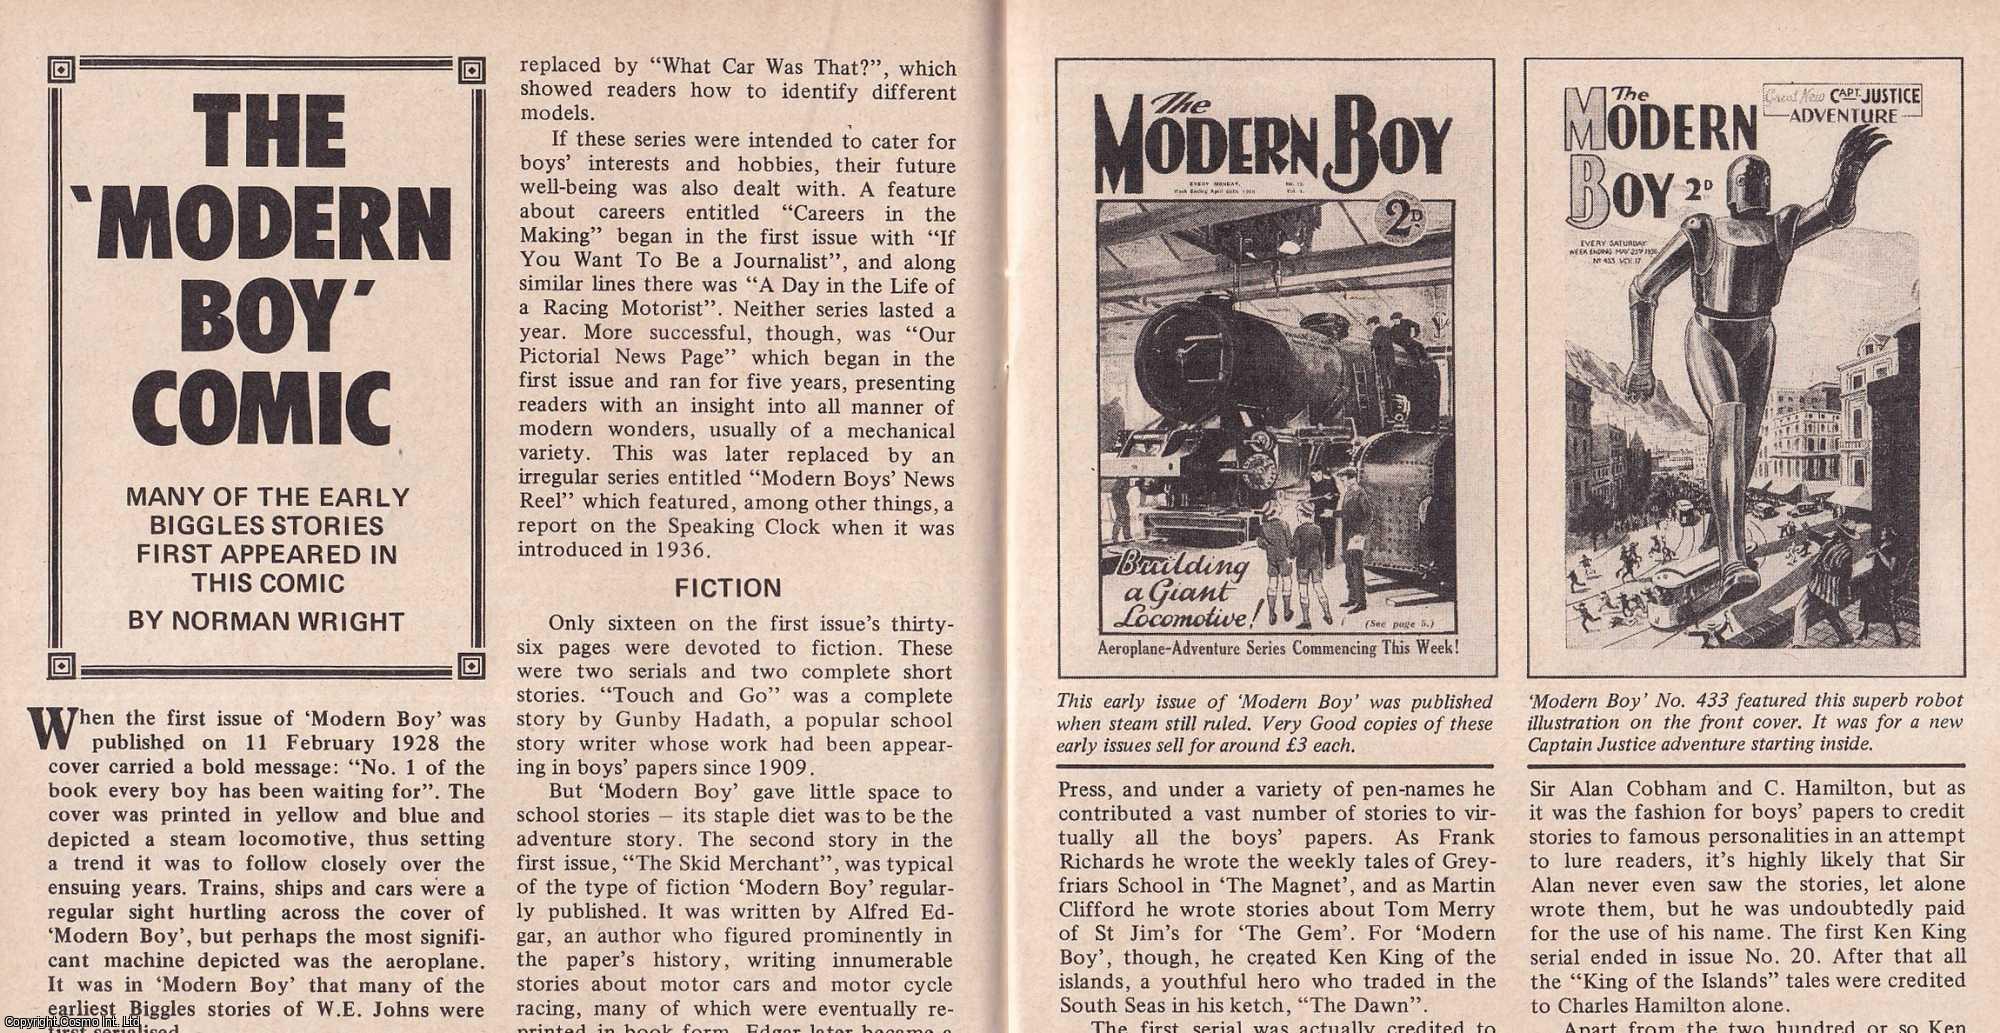 Norman Wright - The Modern Boy Comic : Many of The Early Biggles Stories First Appeared in This Comic. This is an original article separated from an issue of The Book & Magazine Collector publication.